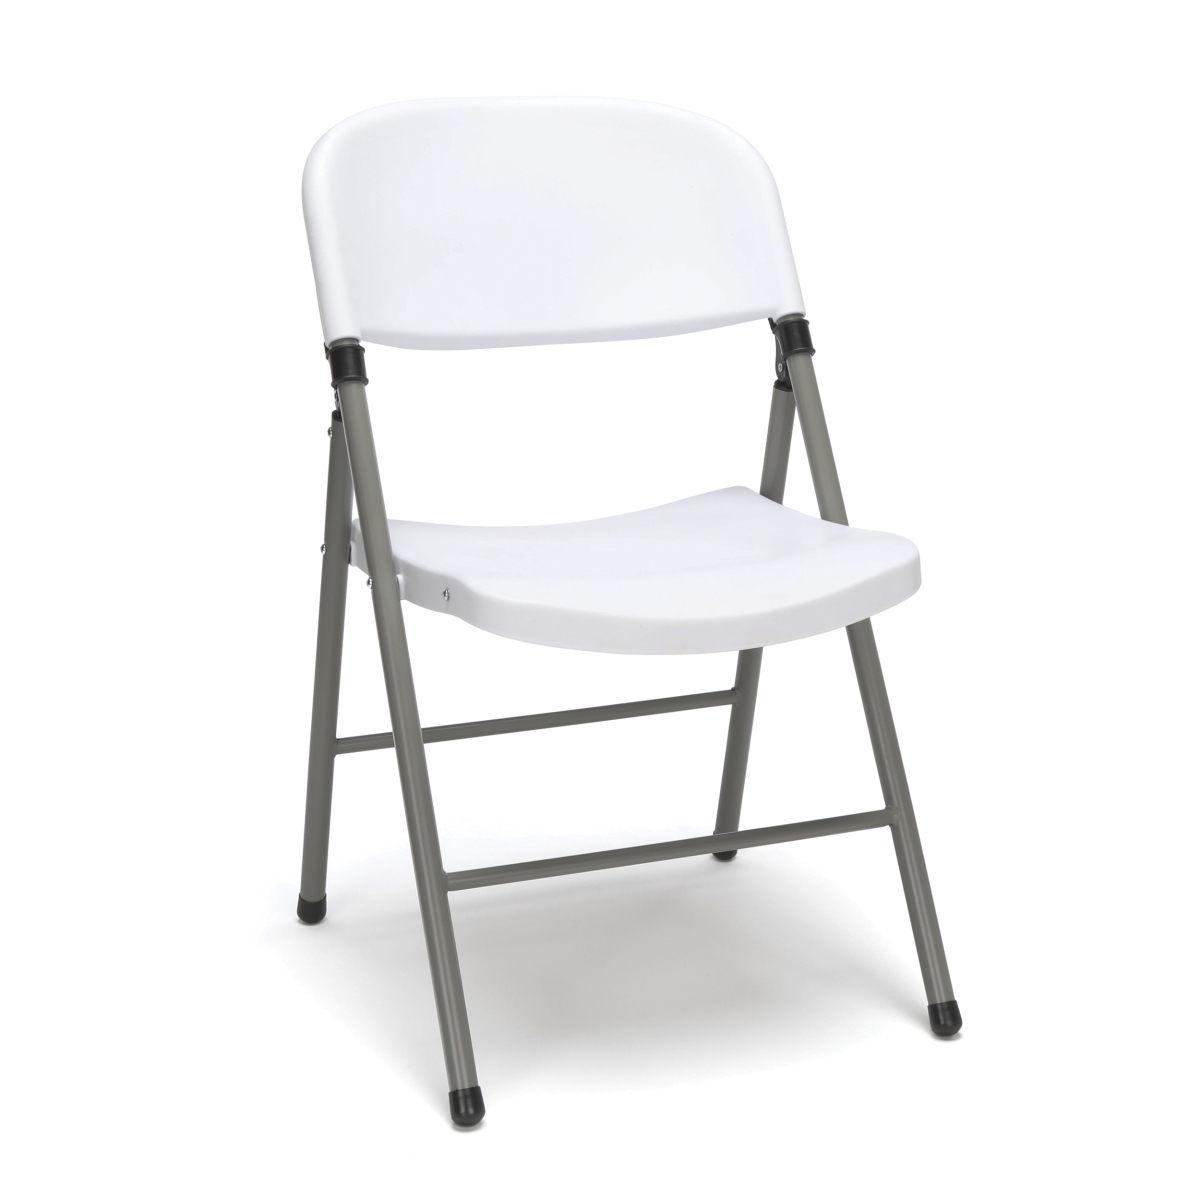 Ess-5000-wht Plastic Folding Chair, White, Pack Of 4